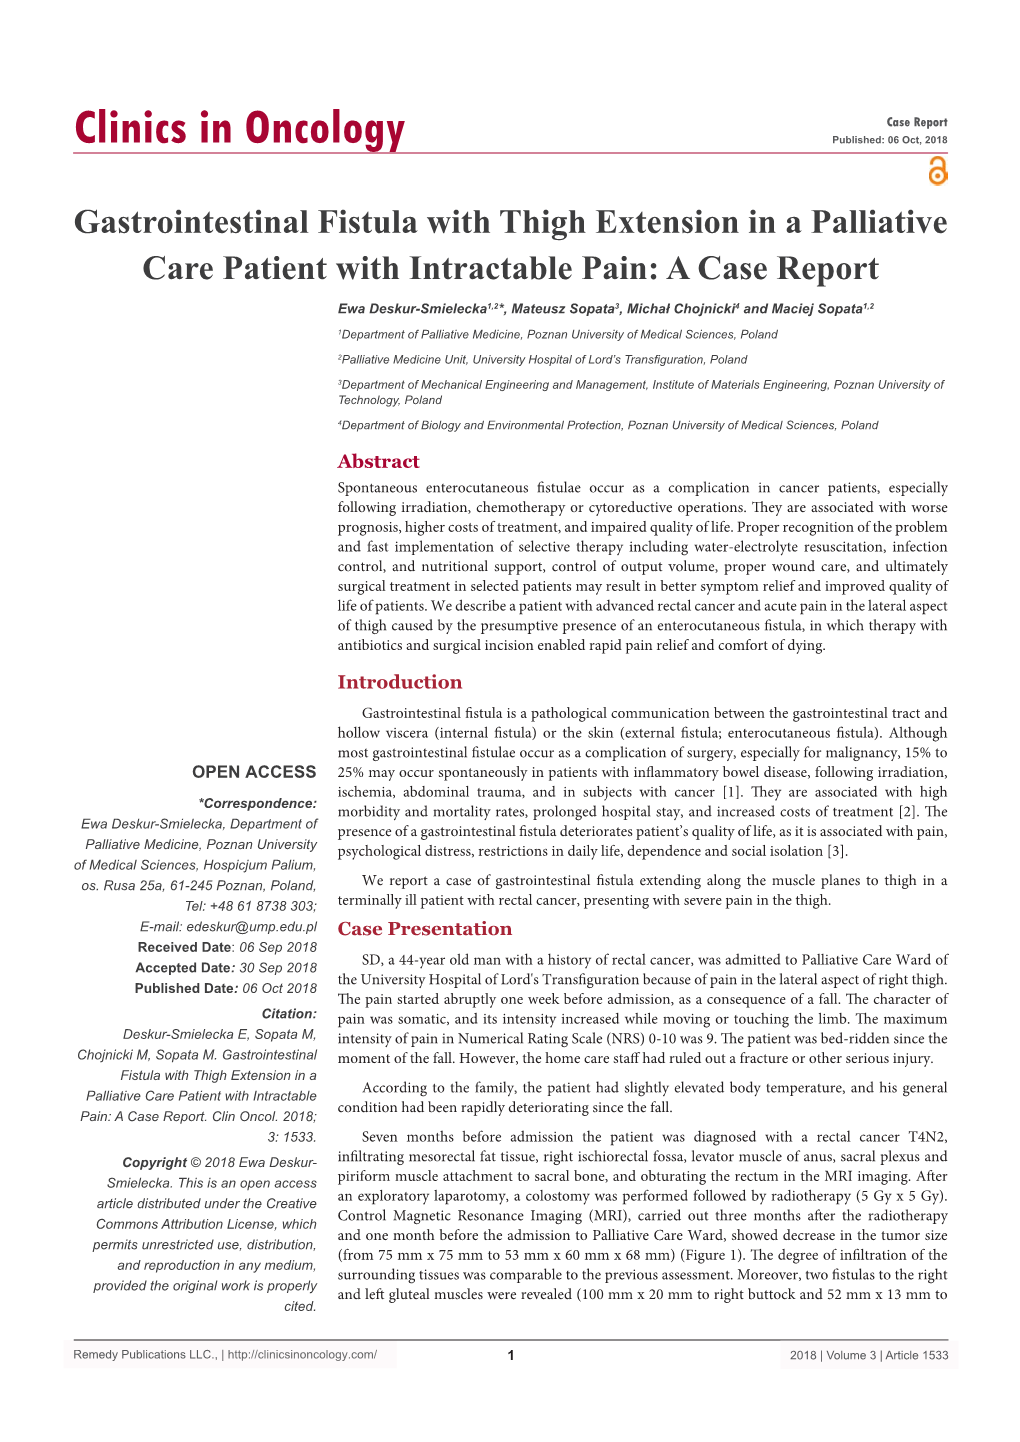 Gastrointestinal Fistula with Thigh Extension in a Palliative Care Patient with Intractable Pain: a Case Report